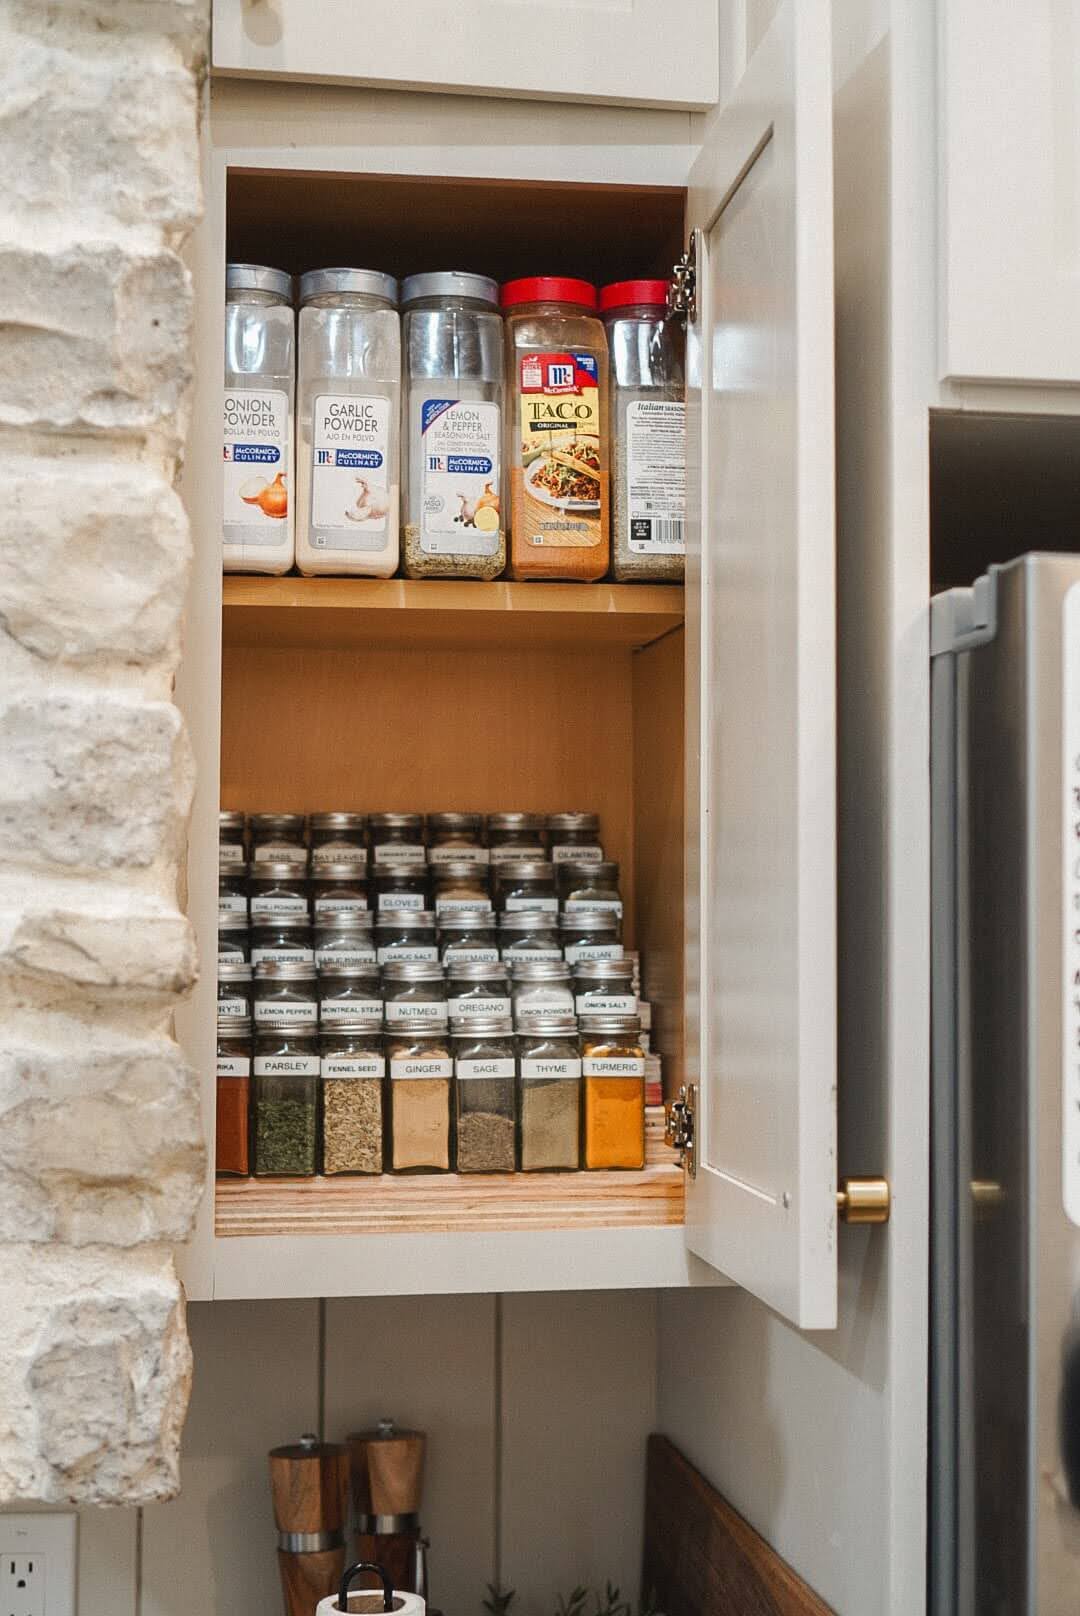 Pretty and organized DIY tiered spice rack in kitchen cabinet